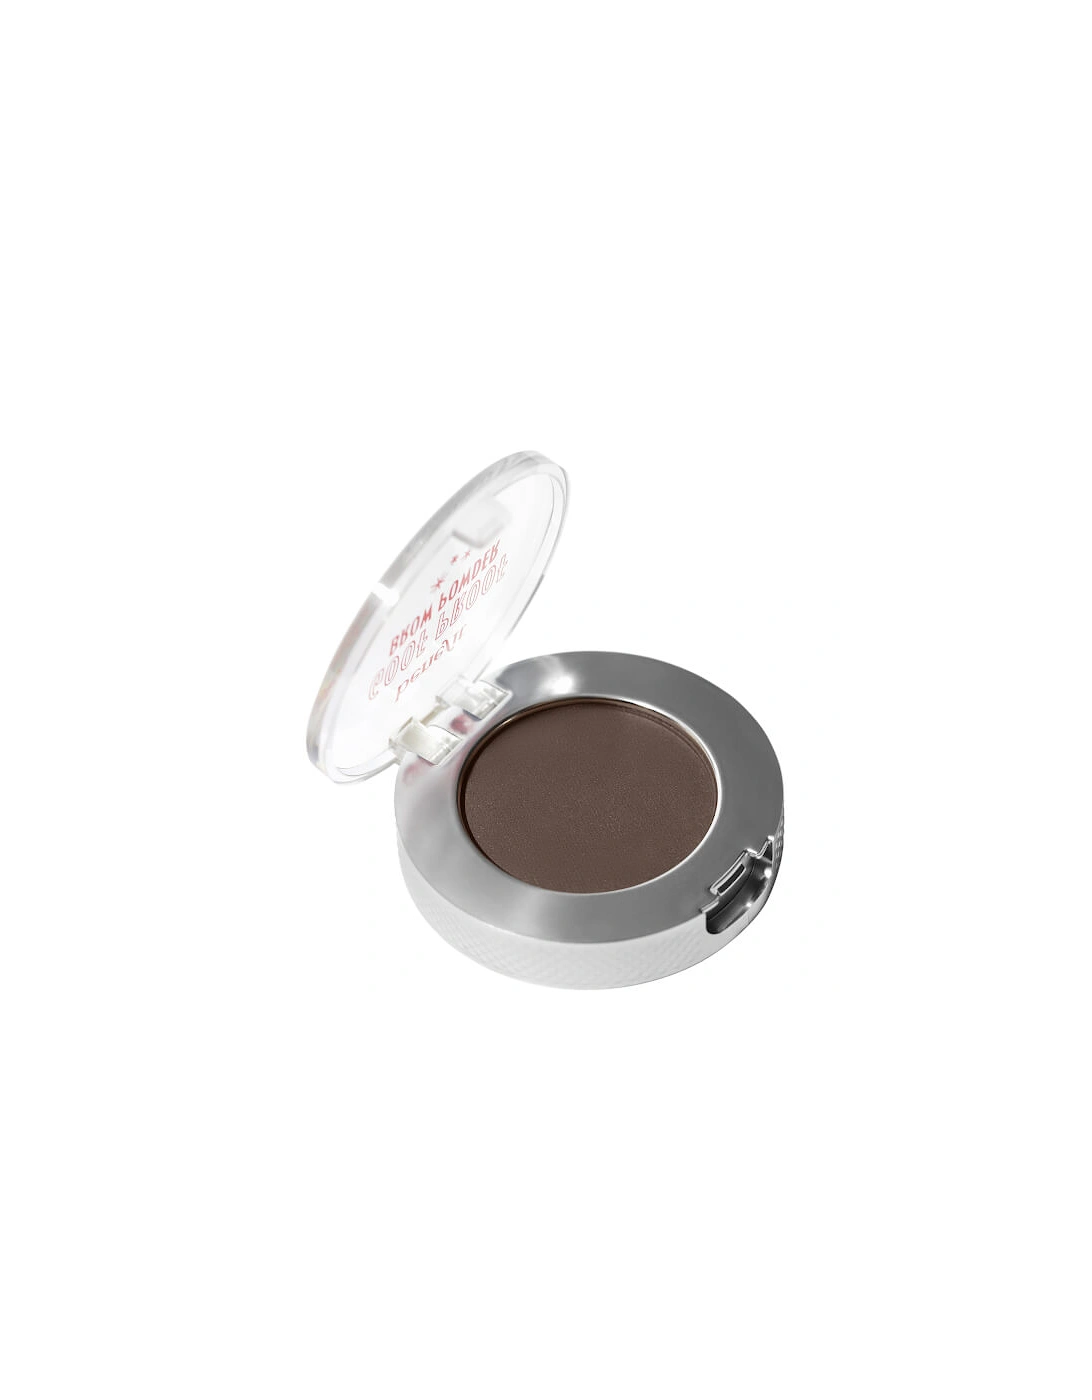 Goof Proof Easy Brow Filling Powder - 04 Warm Deep Brown, 2 of 1